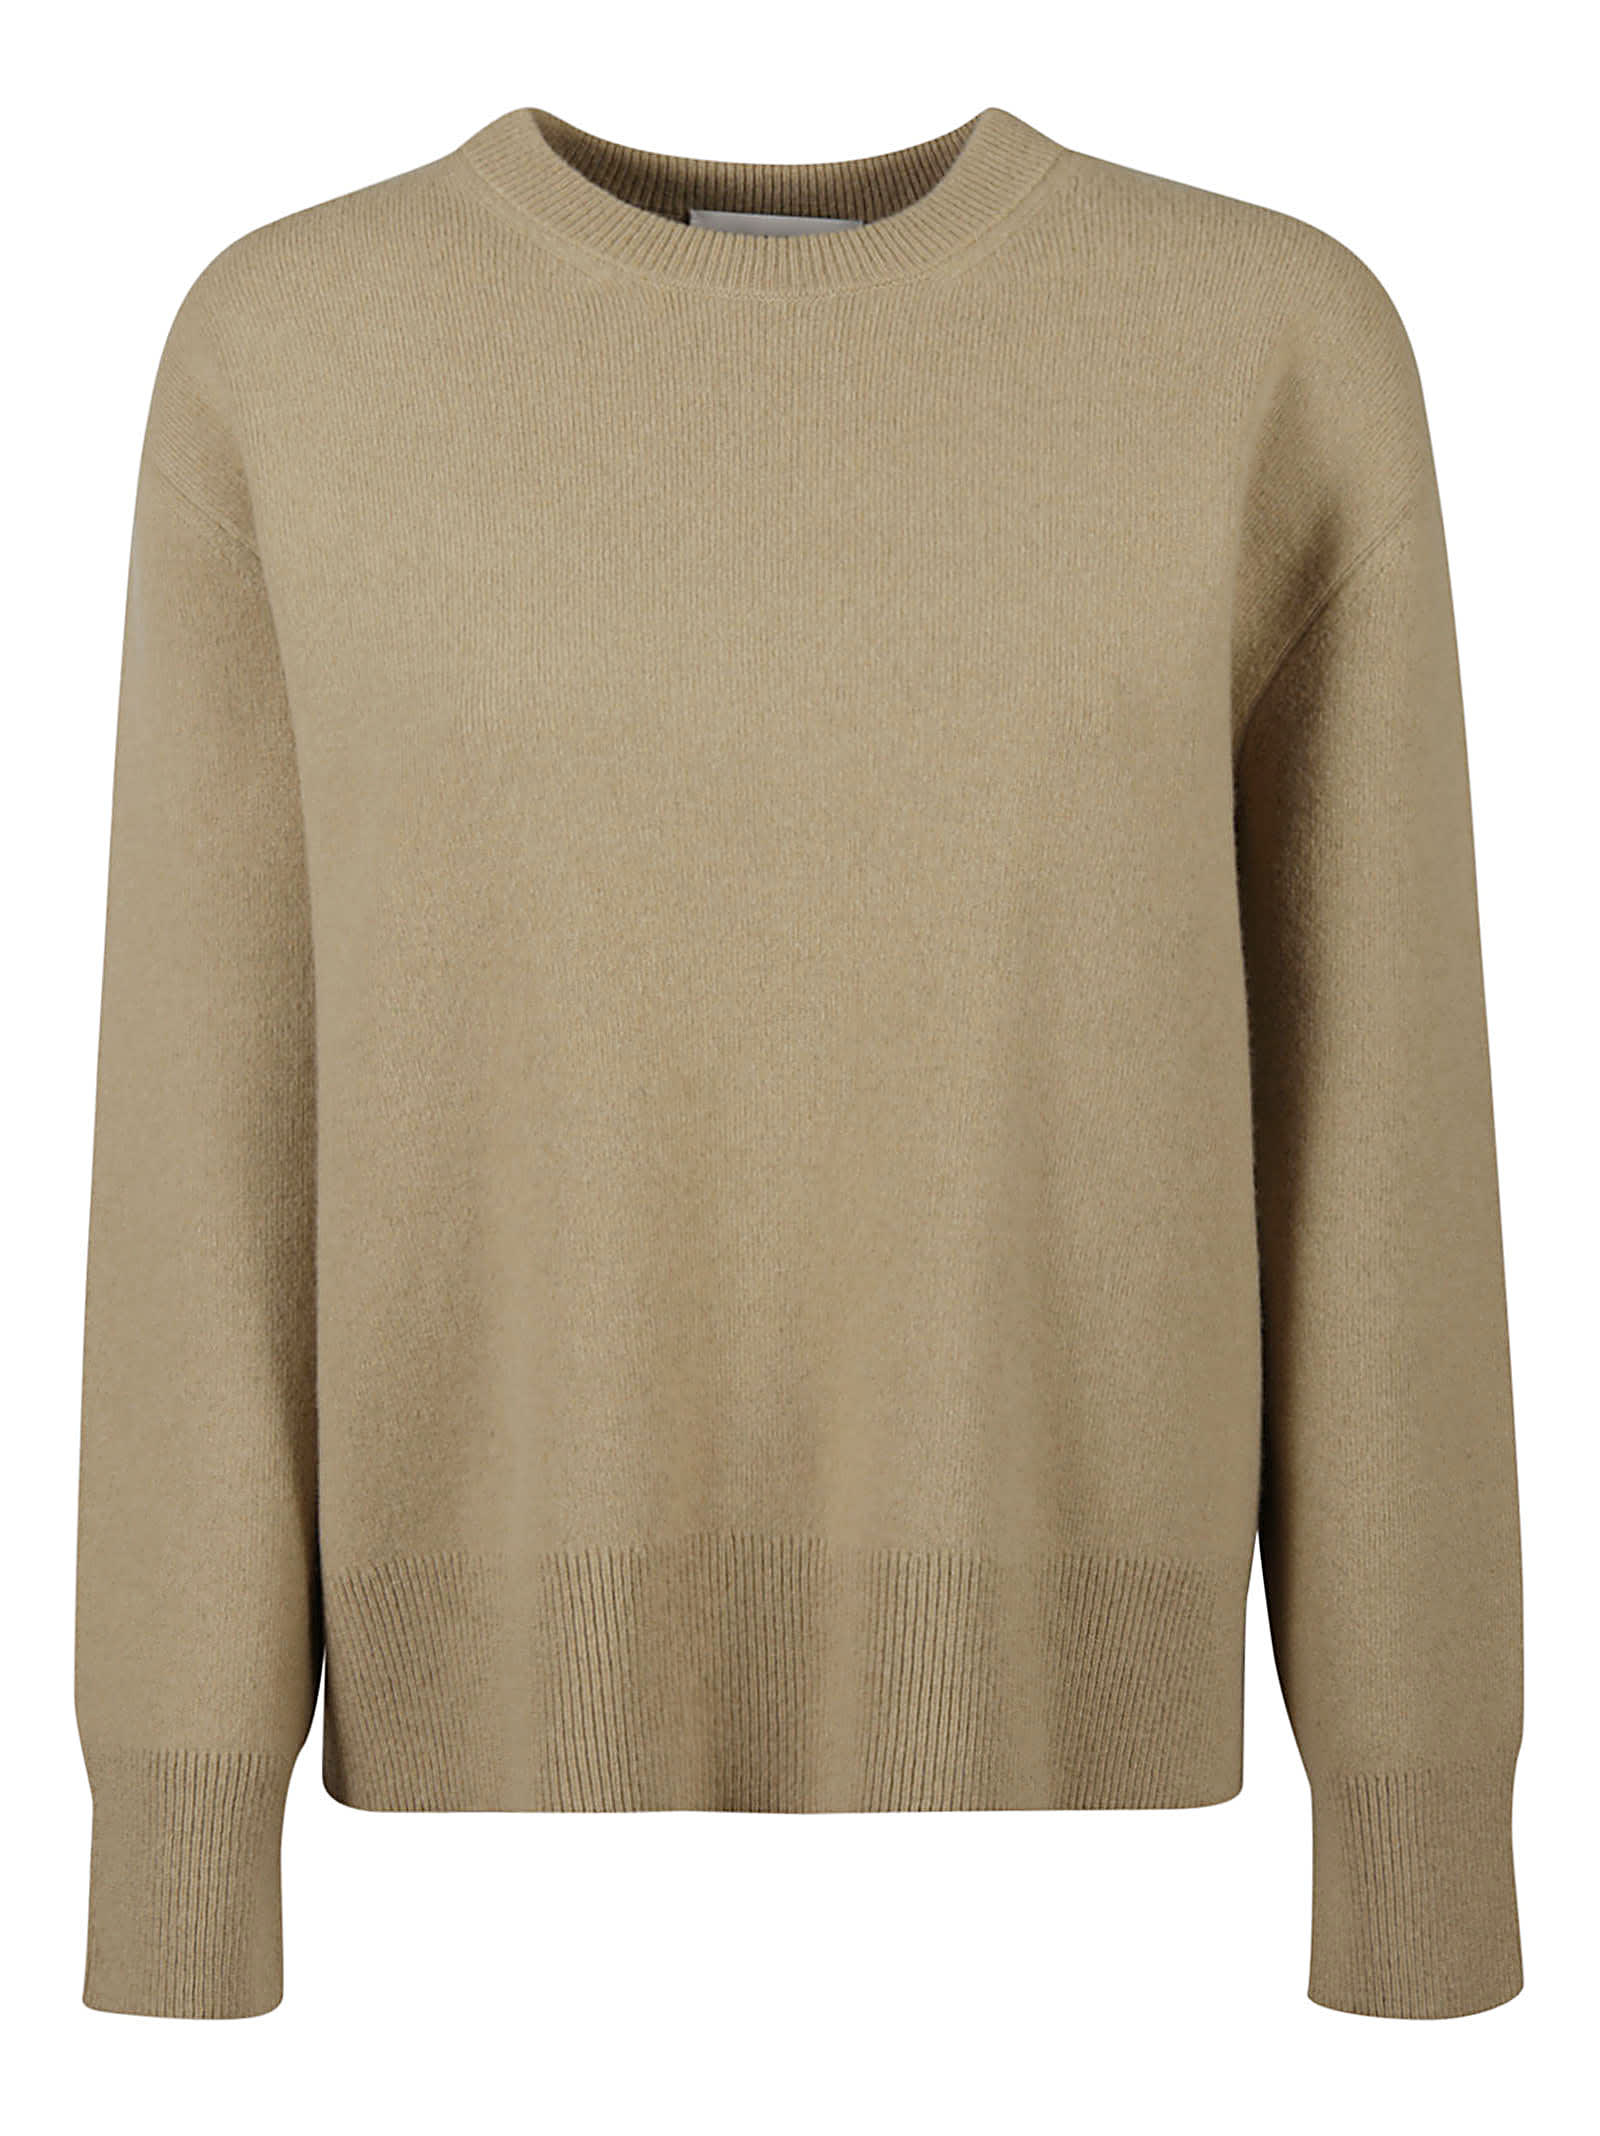 Lanvin Pearl Embellished Ribbed Sweater